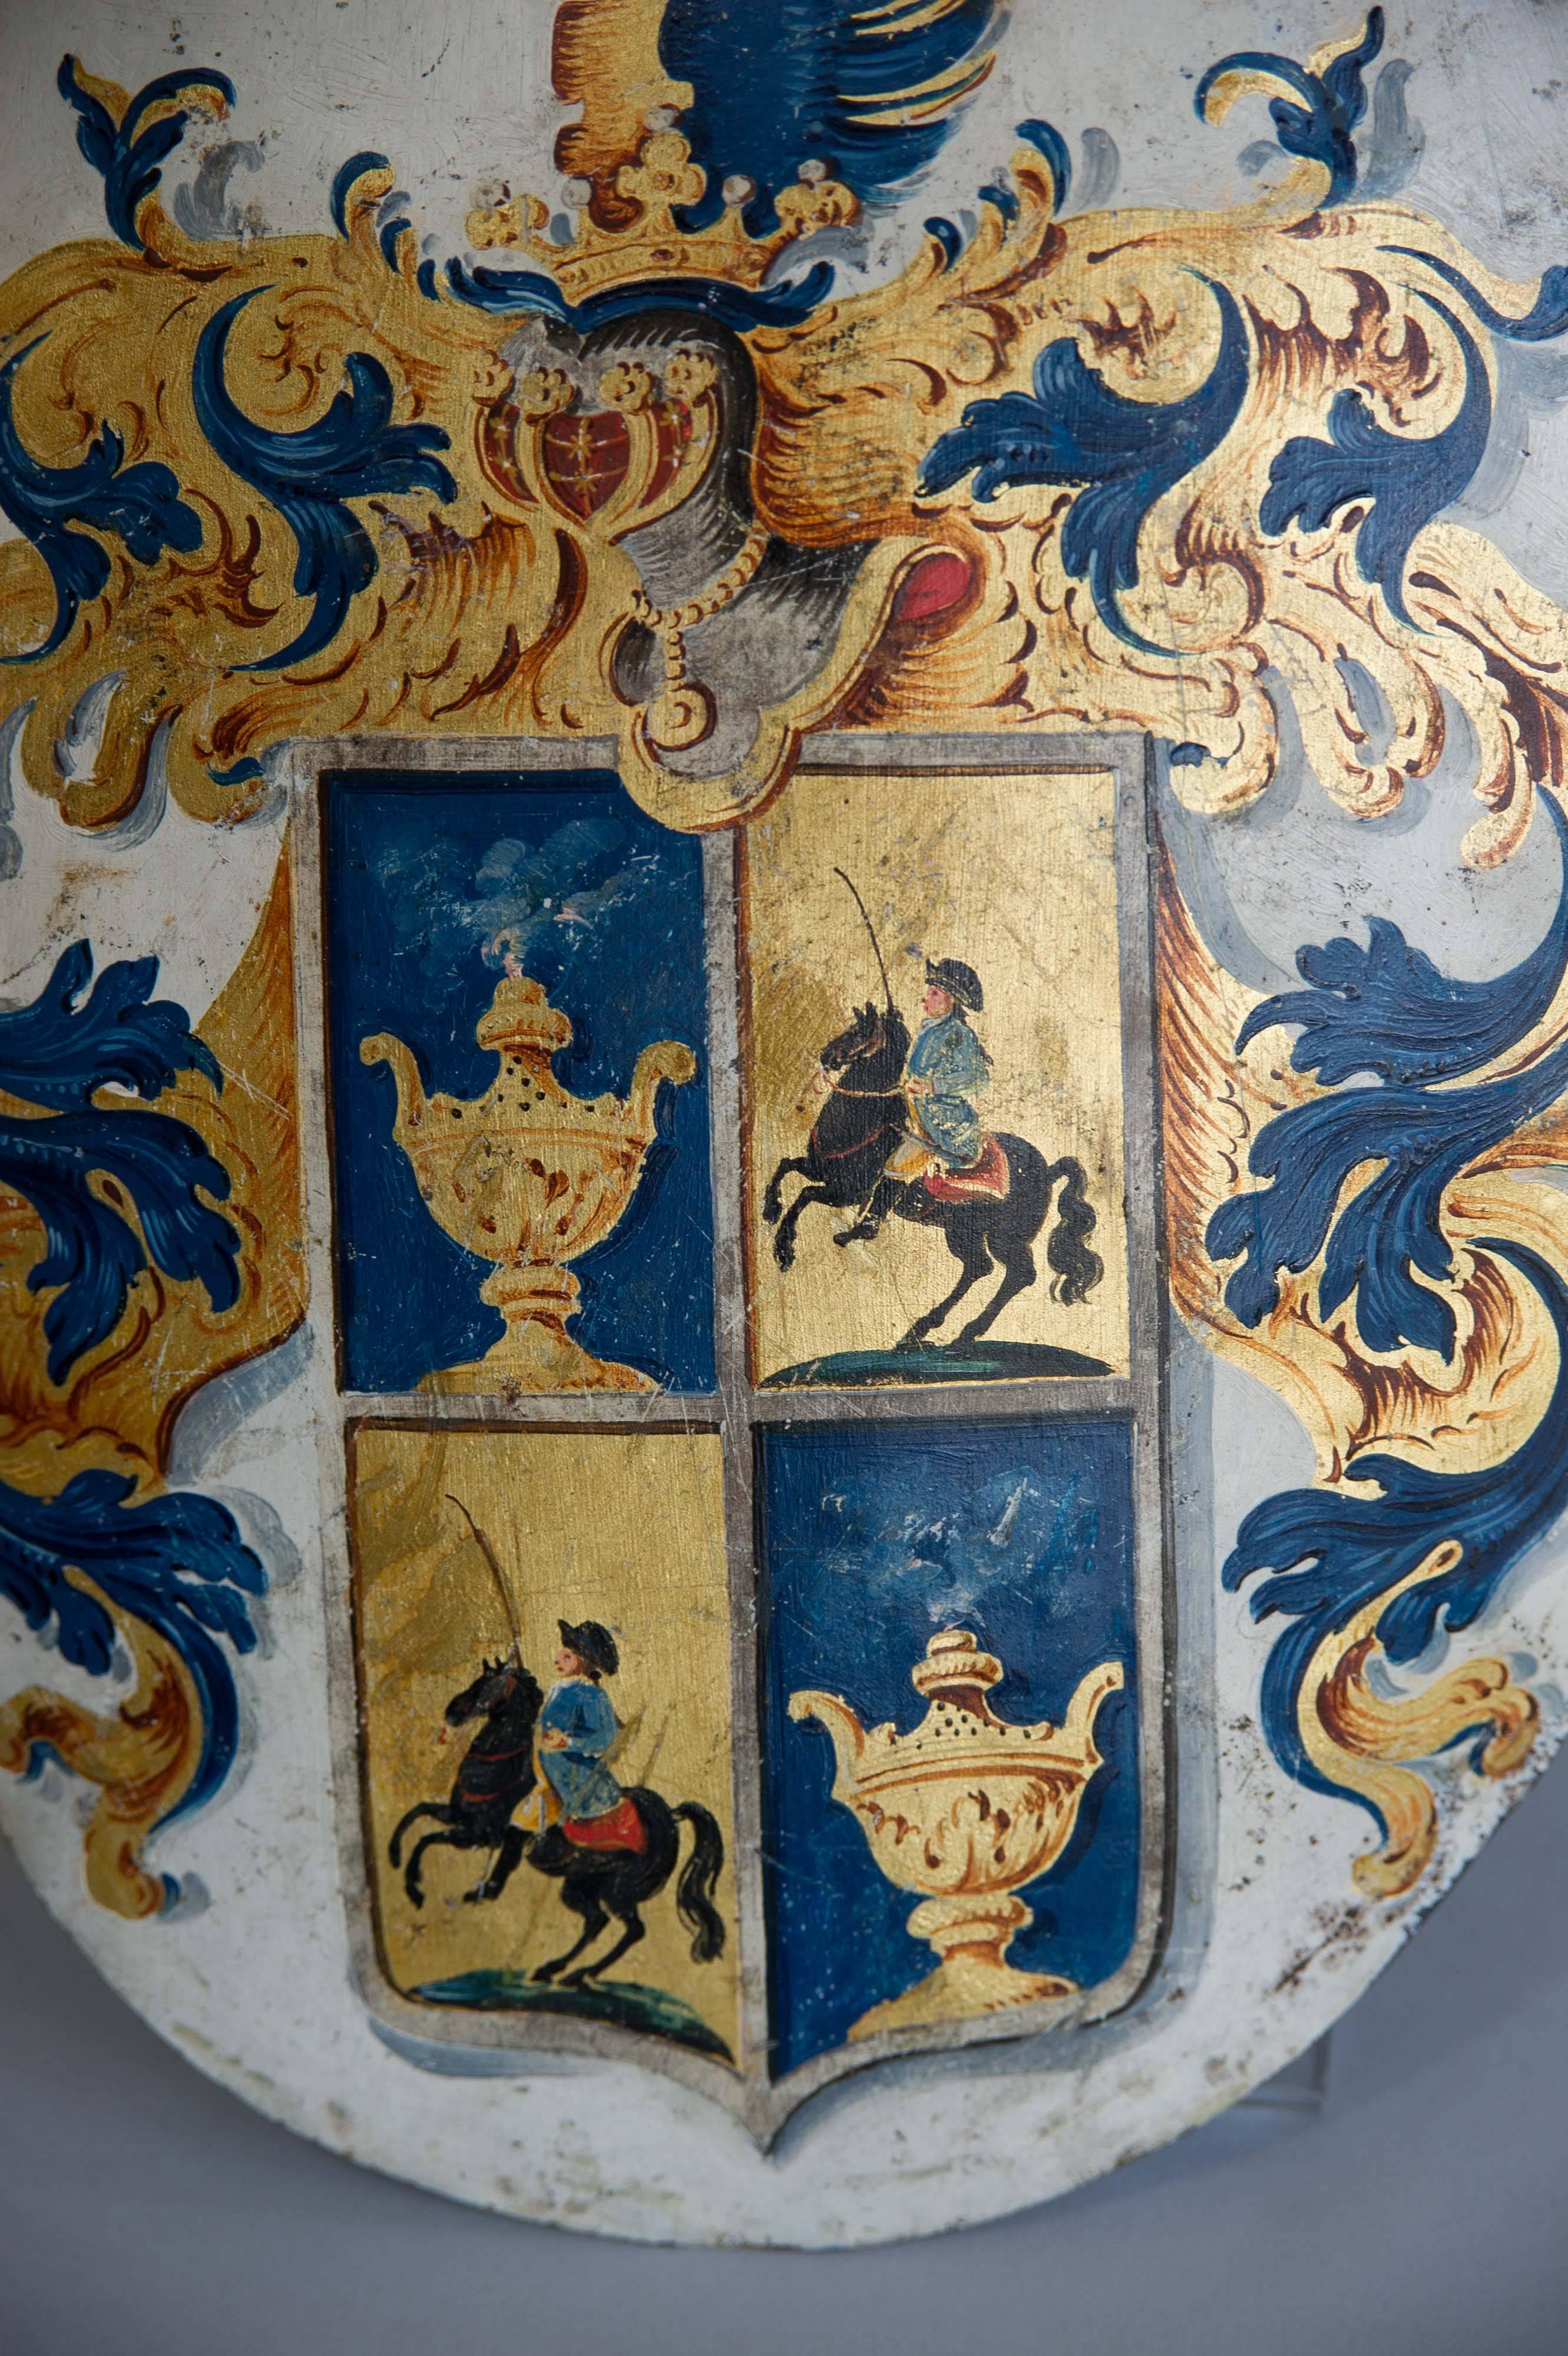 A striking North European coat of arms painted on convex metal dating to the second half of the 18th century. Most probably from Holland or Scandinavia. The reverse bearing the faint inscription: 'Reverendisimi V.V. de Vaukescuthe Archidiaconi'. The